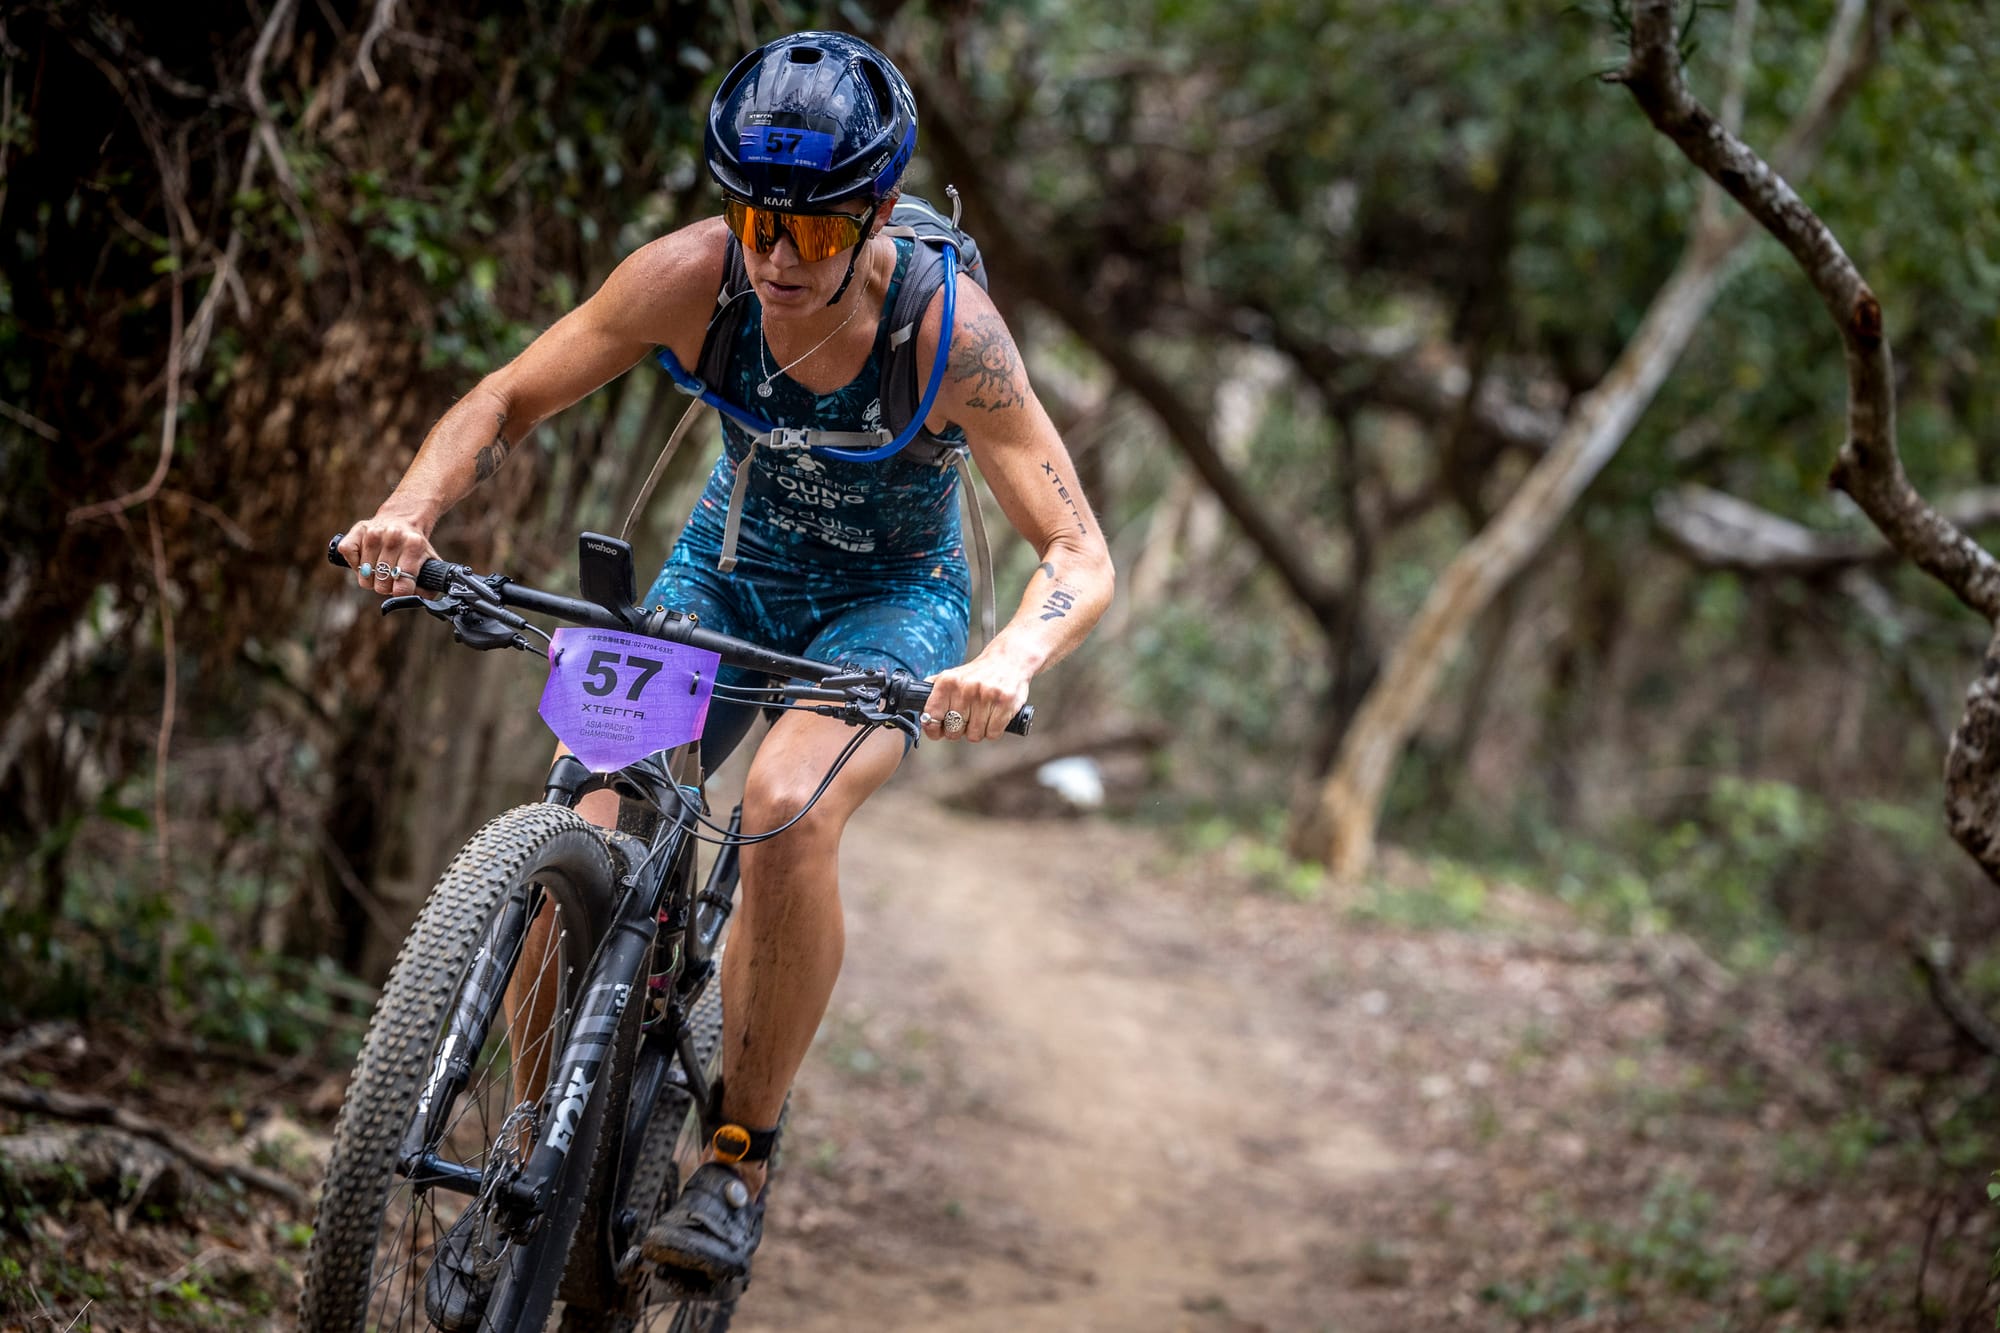 Solenne Billouin Wins in Challenging Conditions at Xterra World Cup in Taiwan